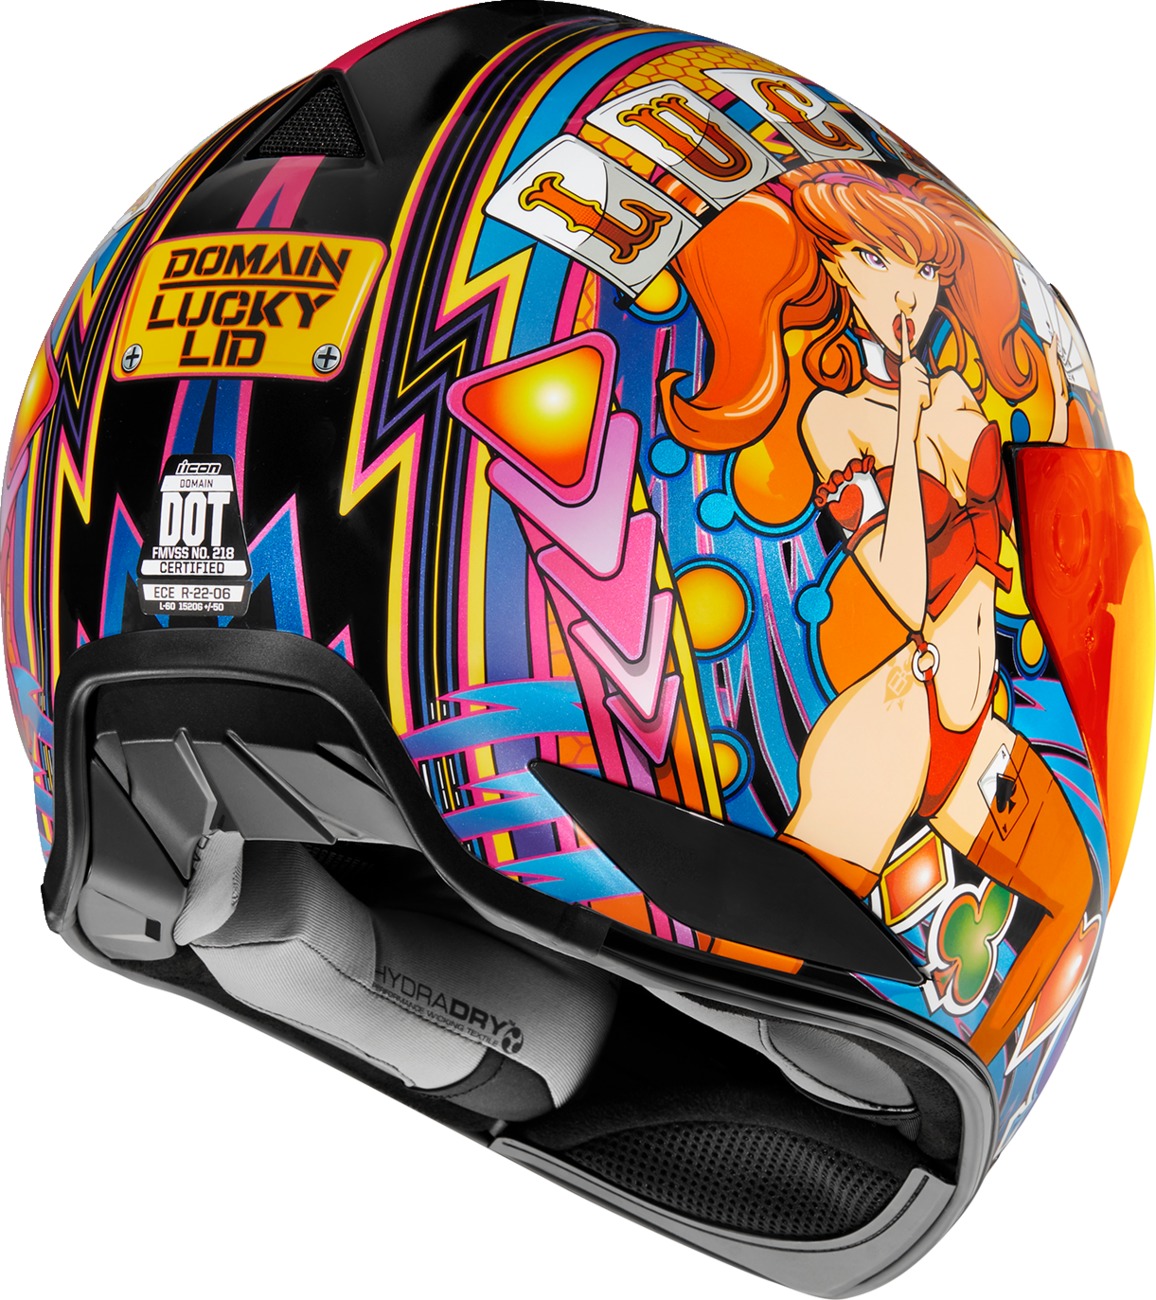 Domain Lucky Lid 4 Helmet Red 3XL - Click Image to Close